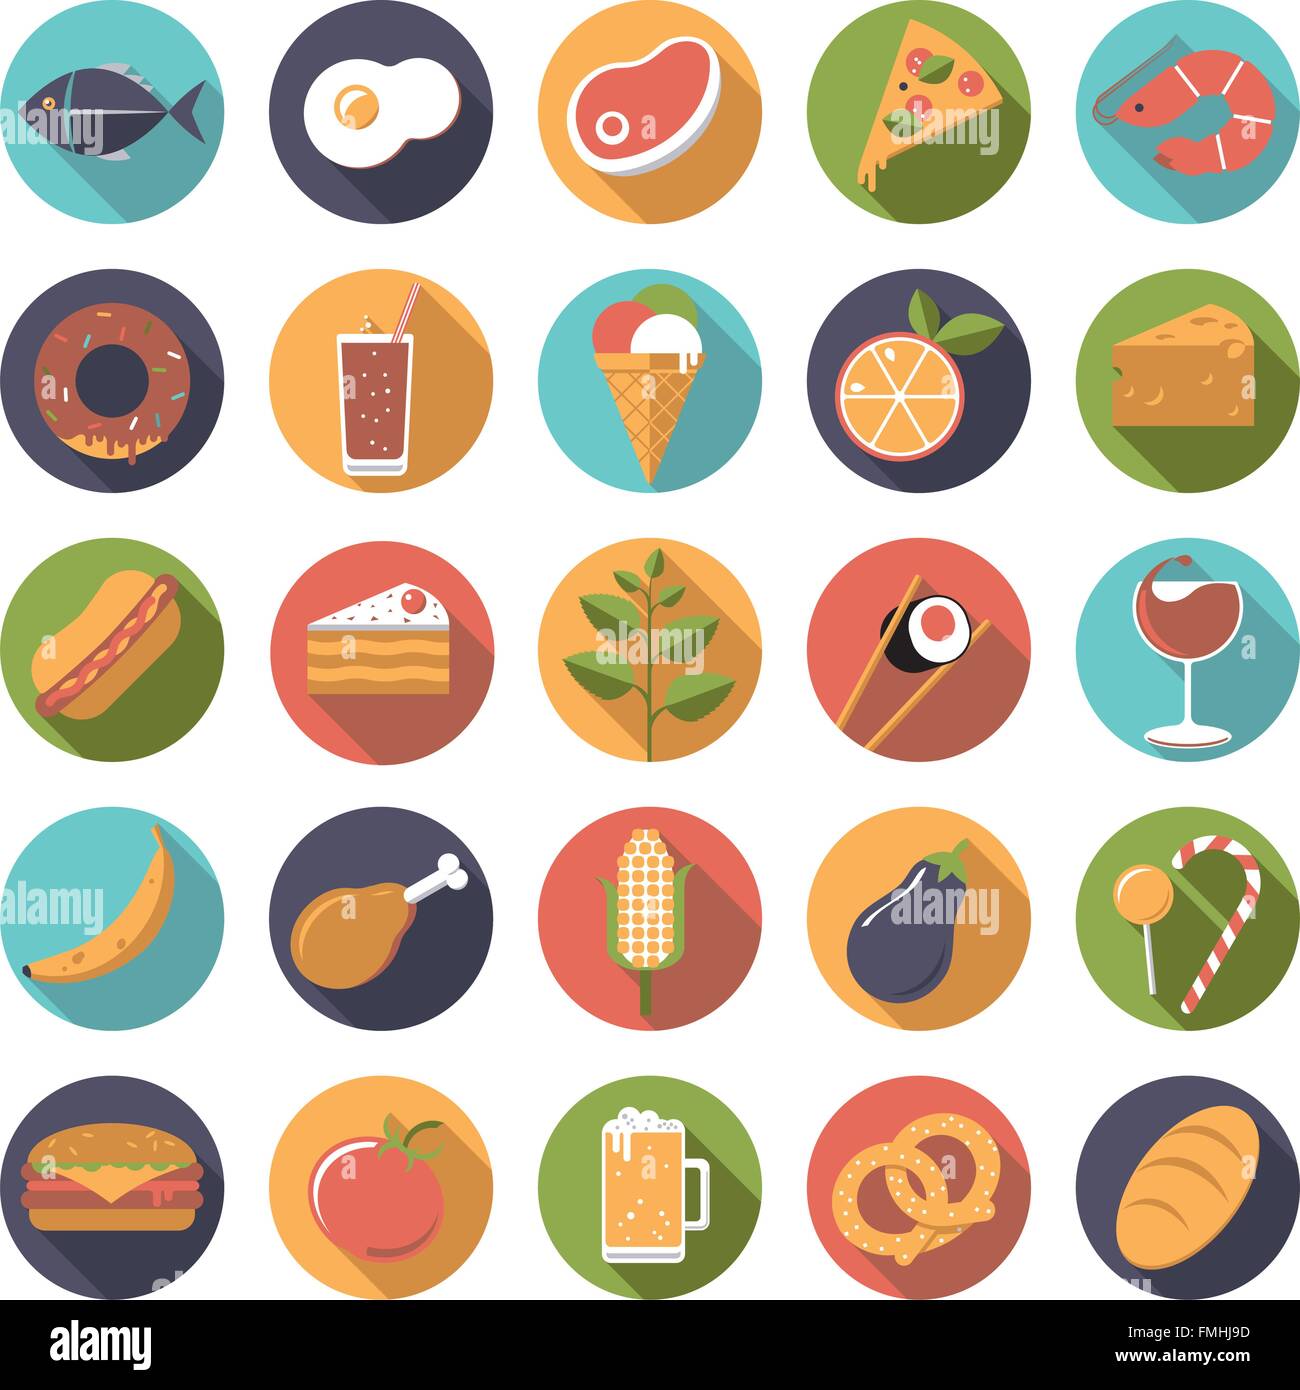 Flat design, long shadow food and drink vector icons set Stock Vector